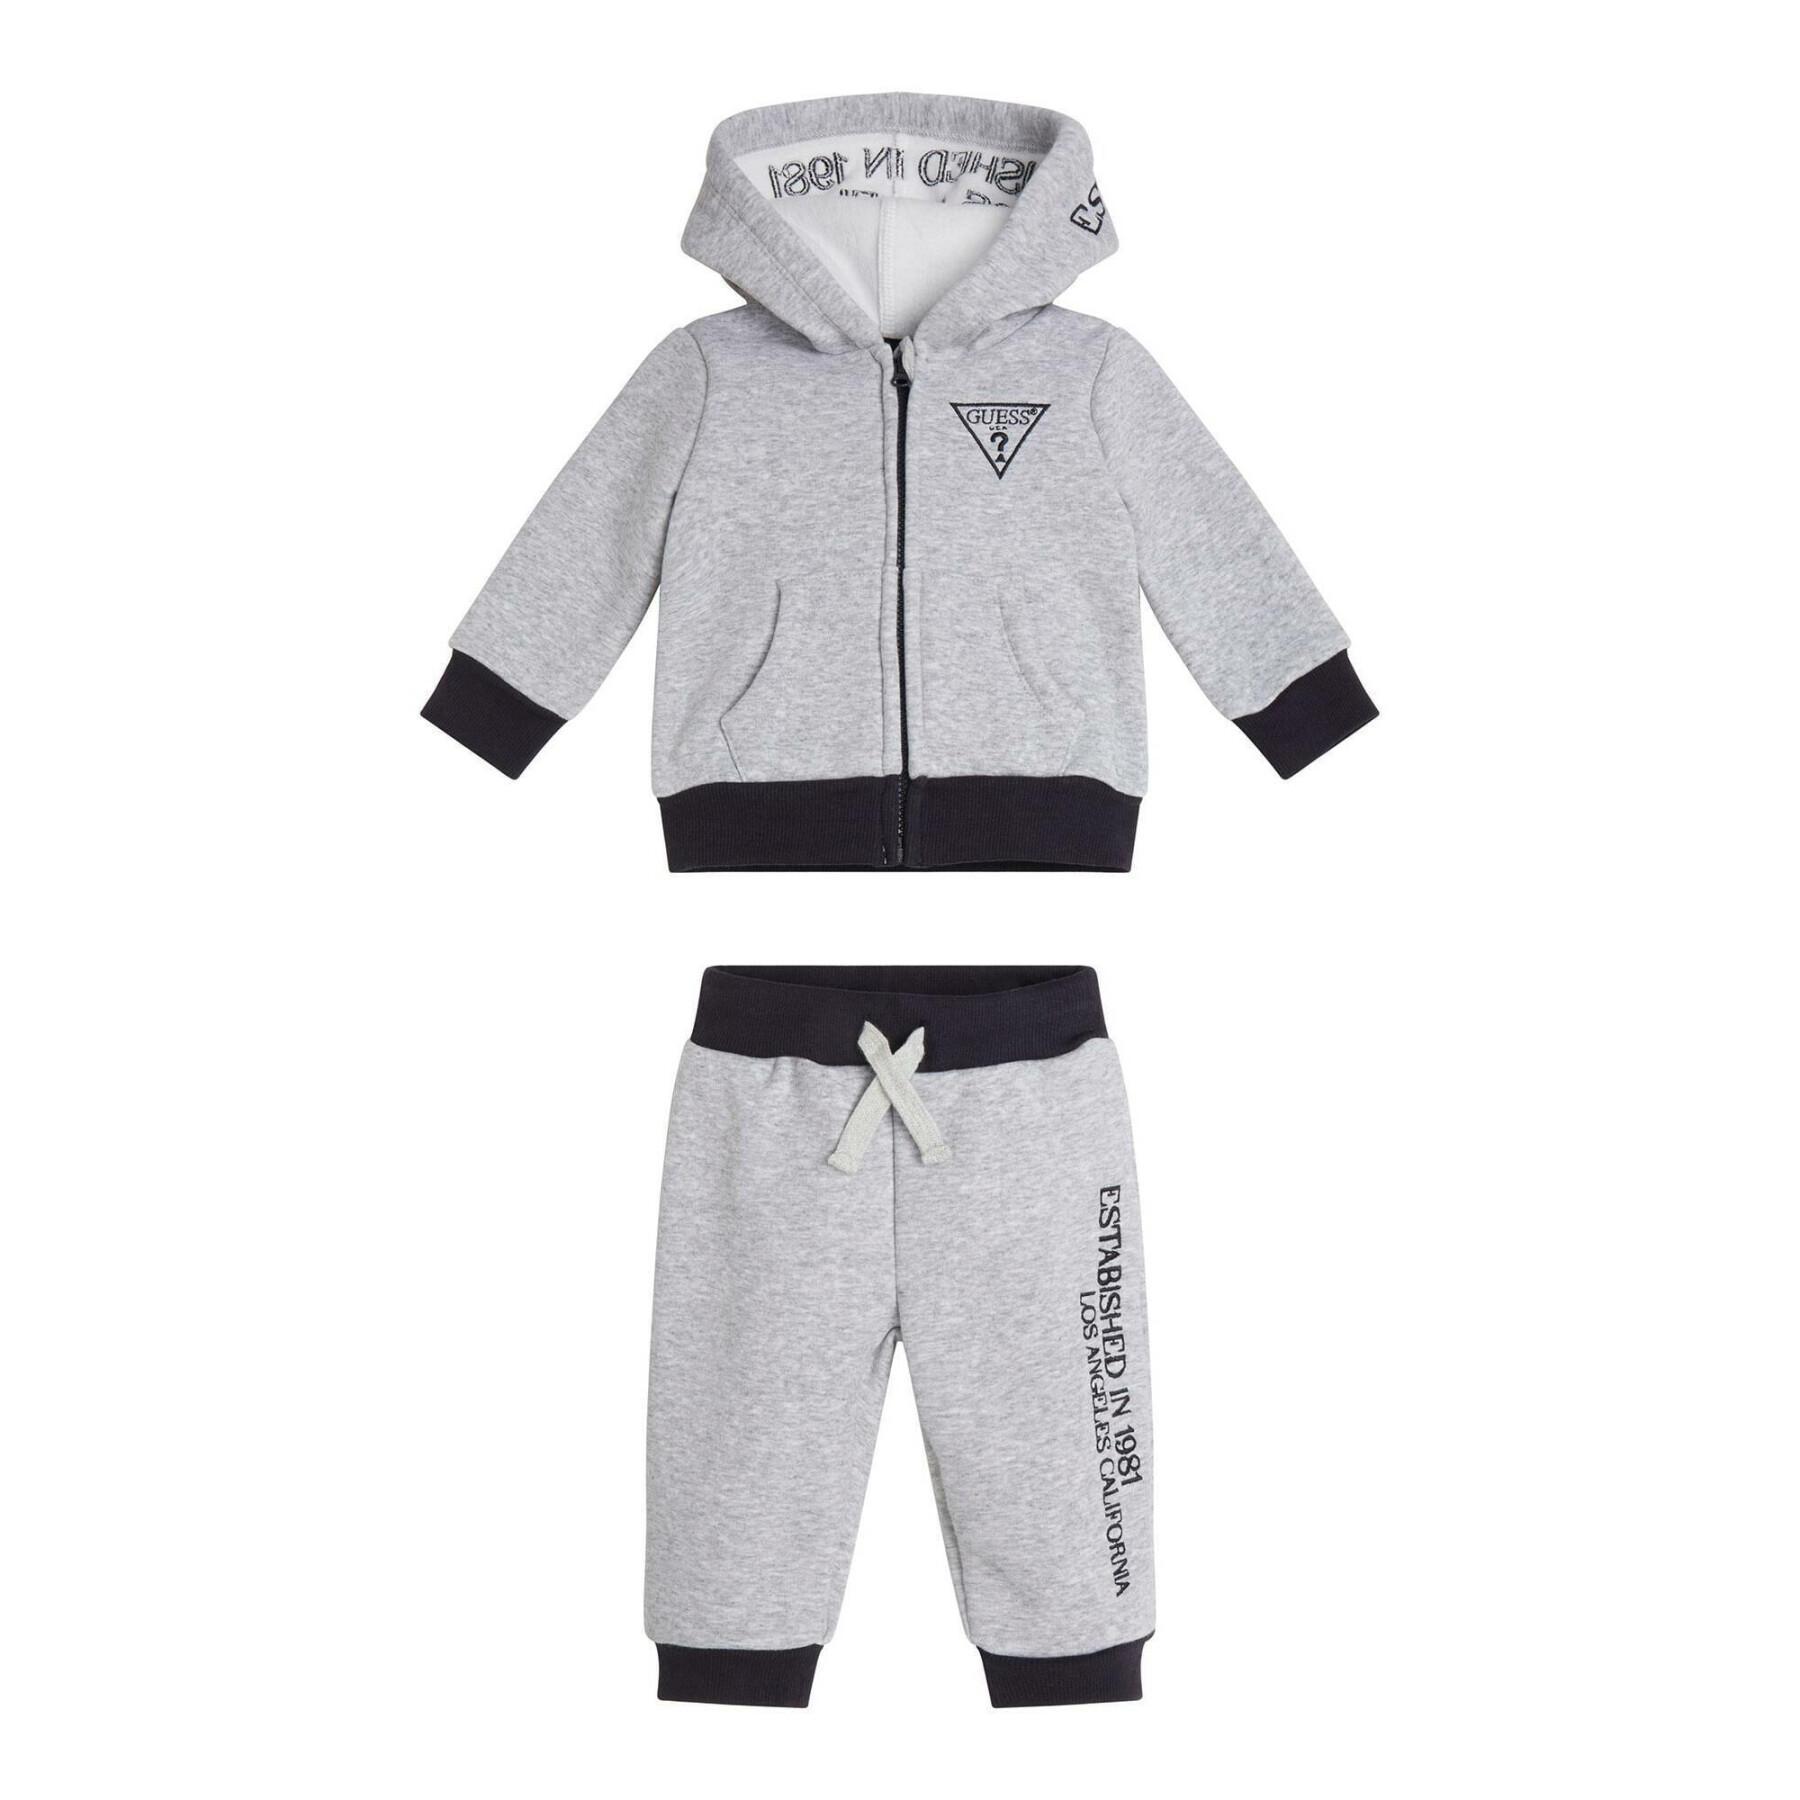 Baby boy sweatshirt and jogging suit Guess